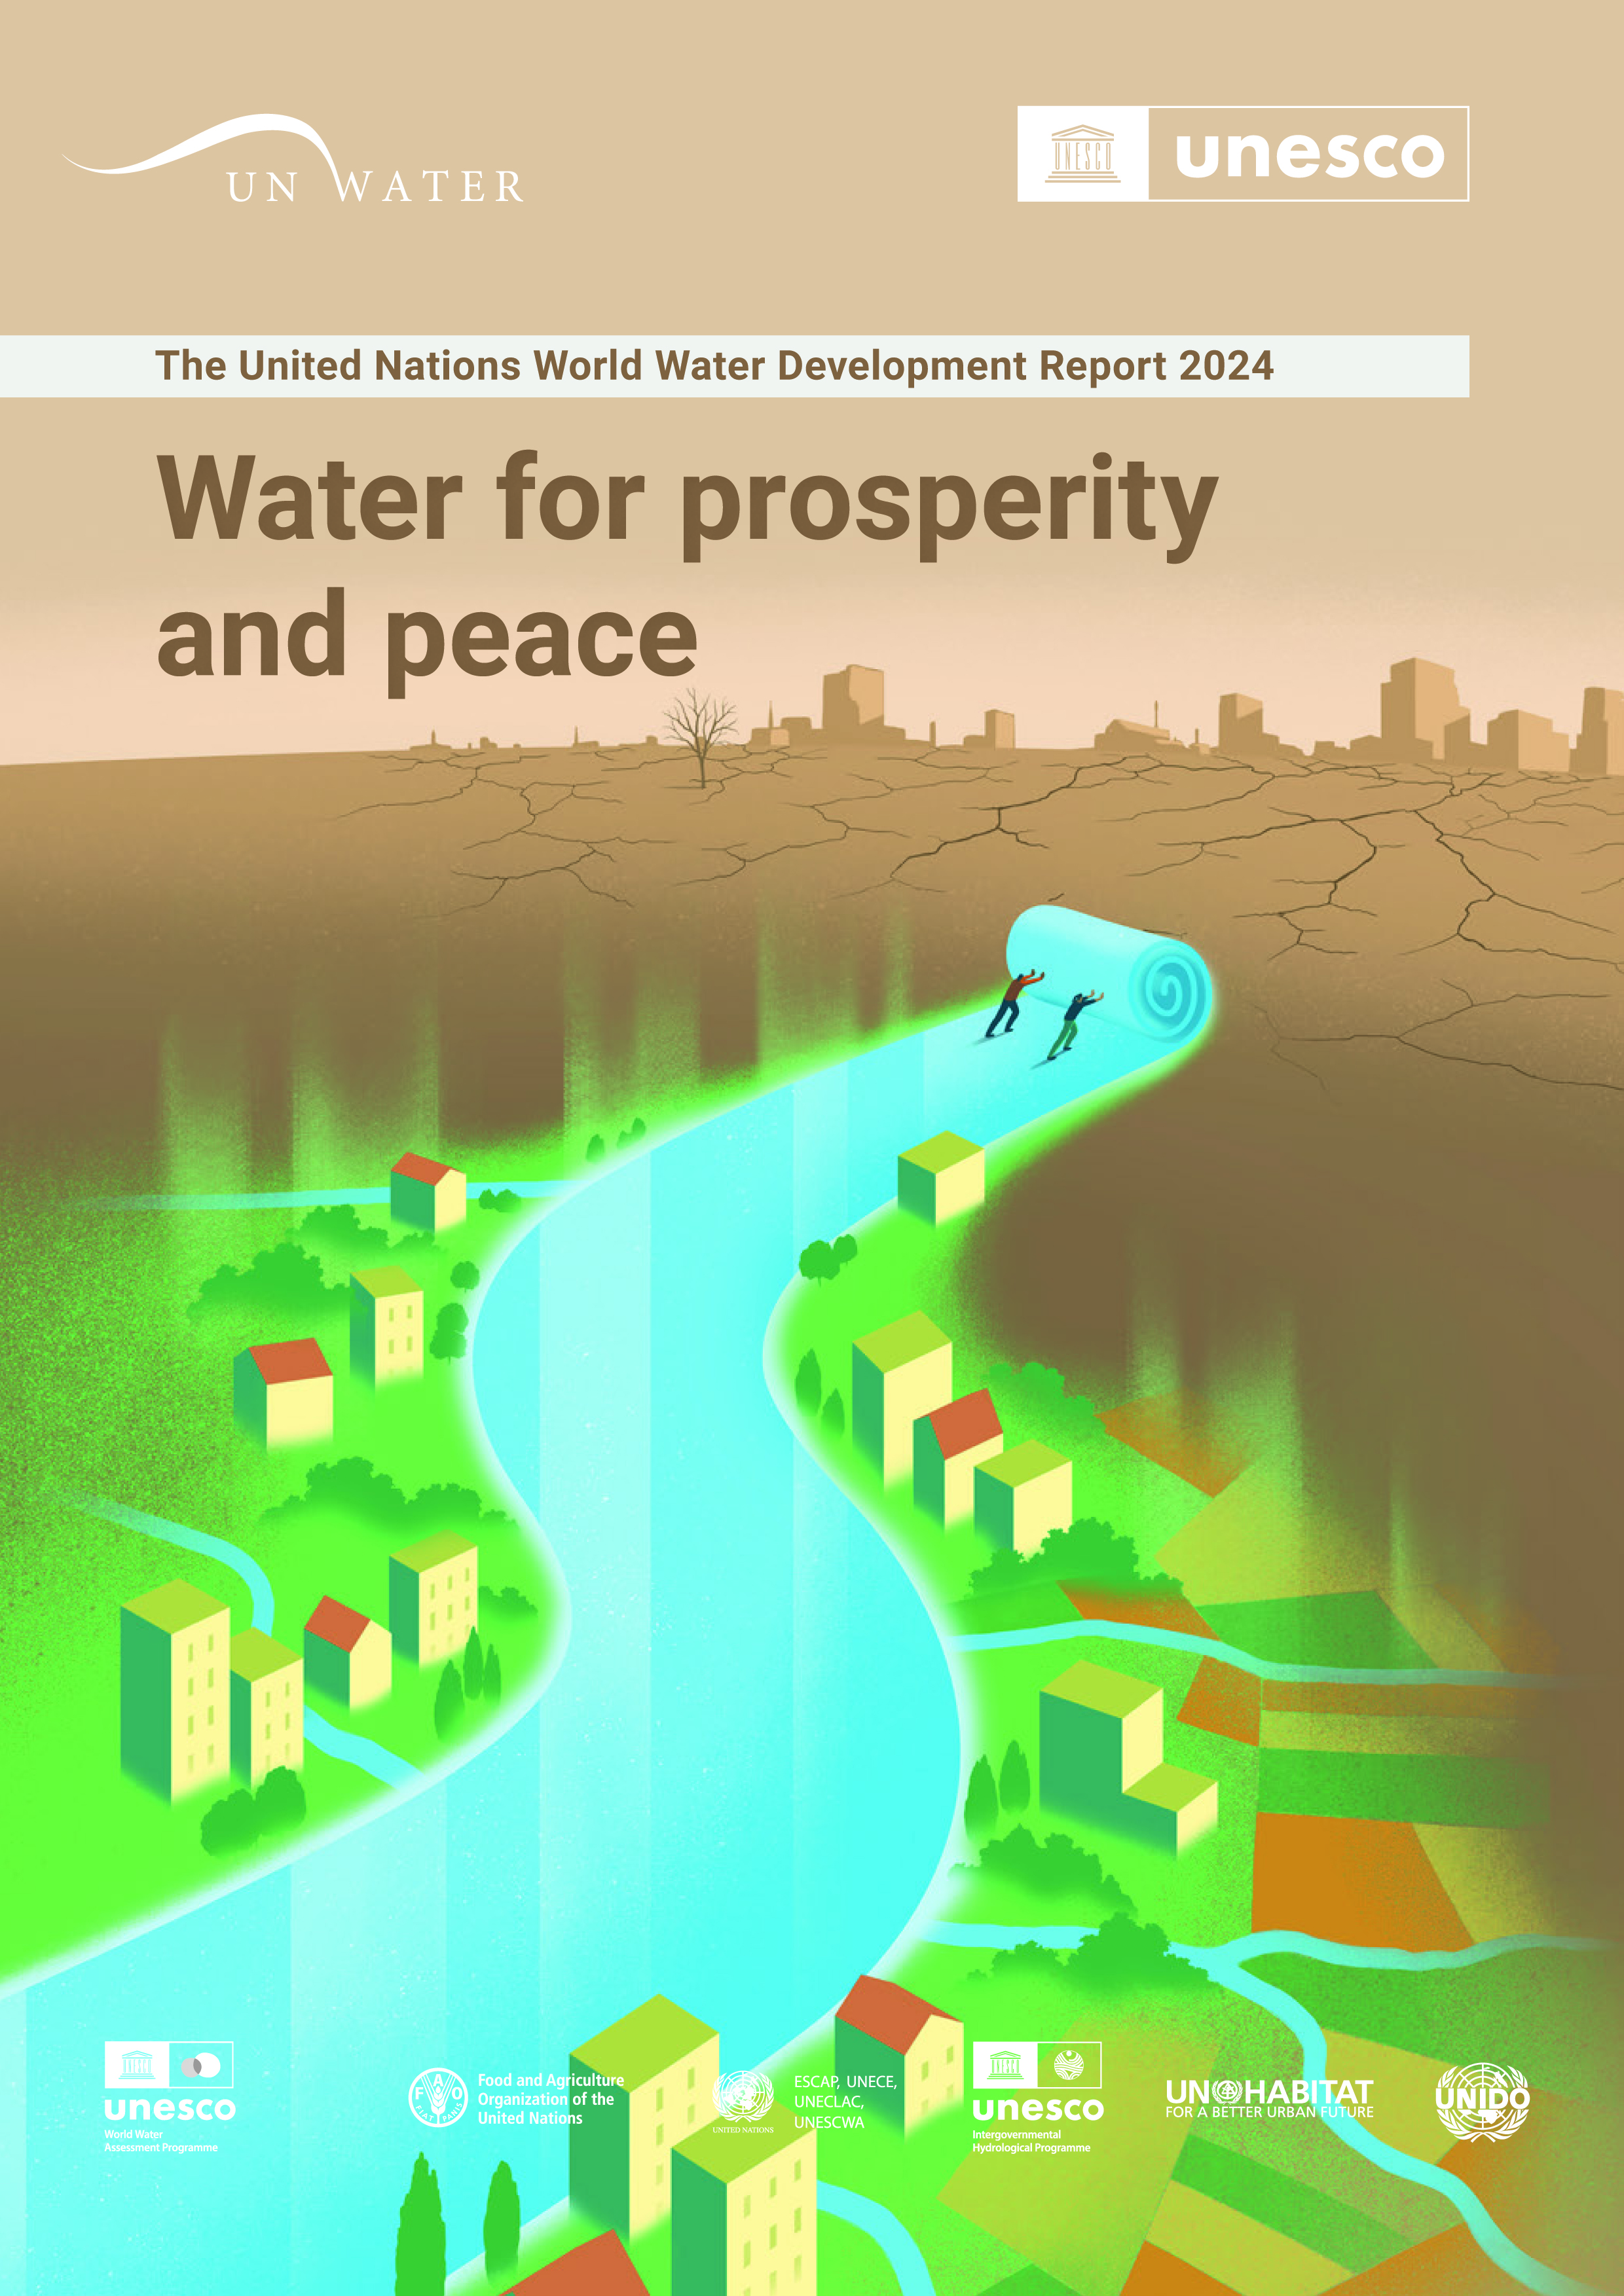 image of The United Nations World Water Development Report 2024